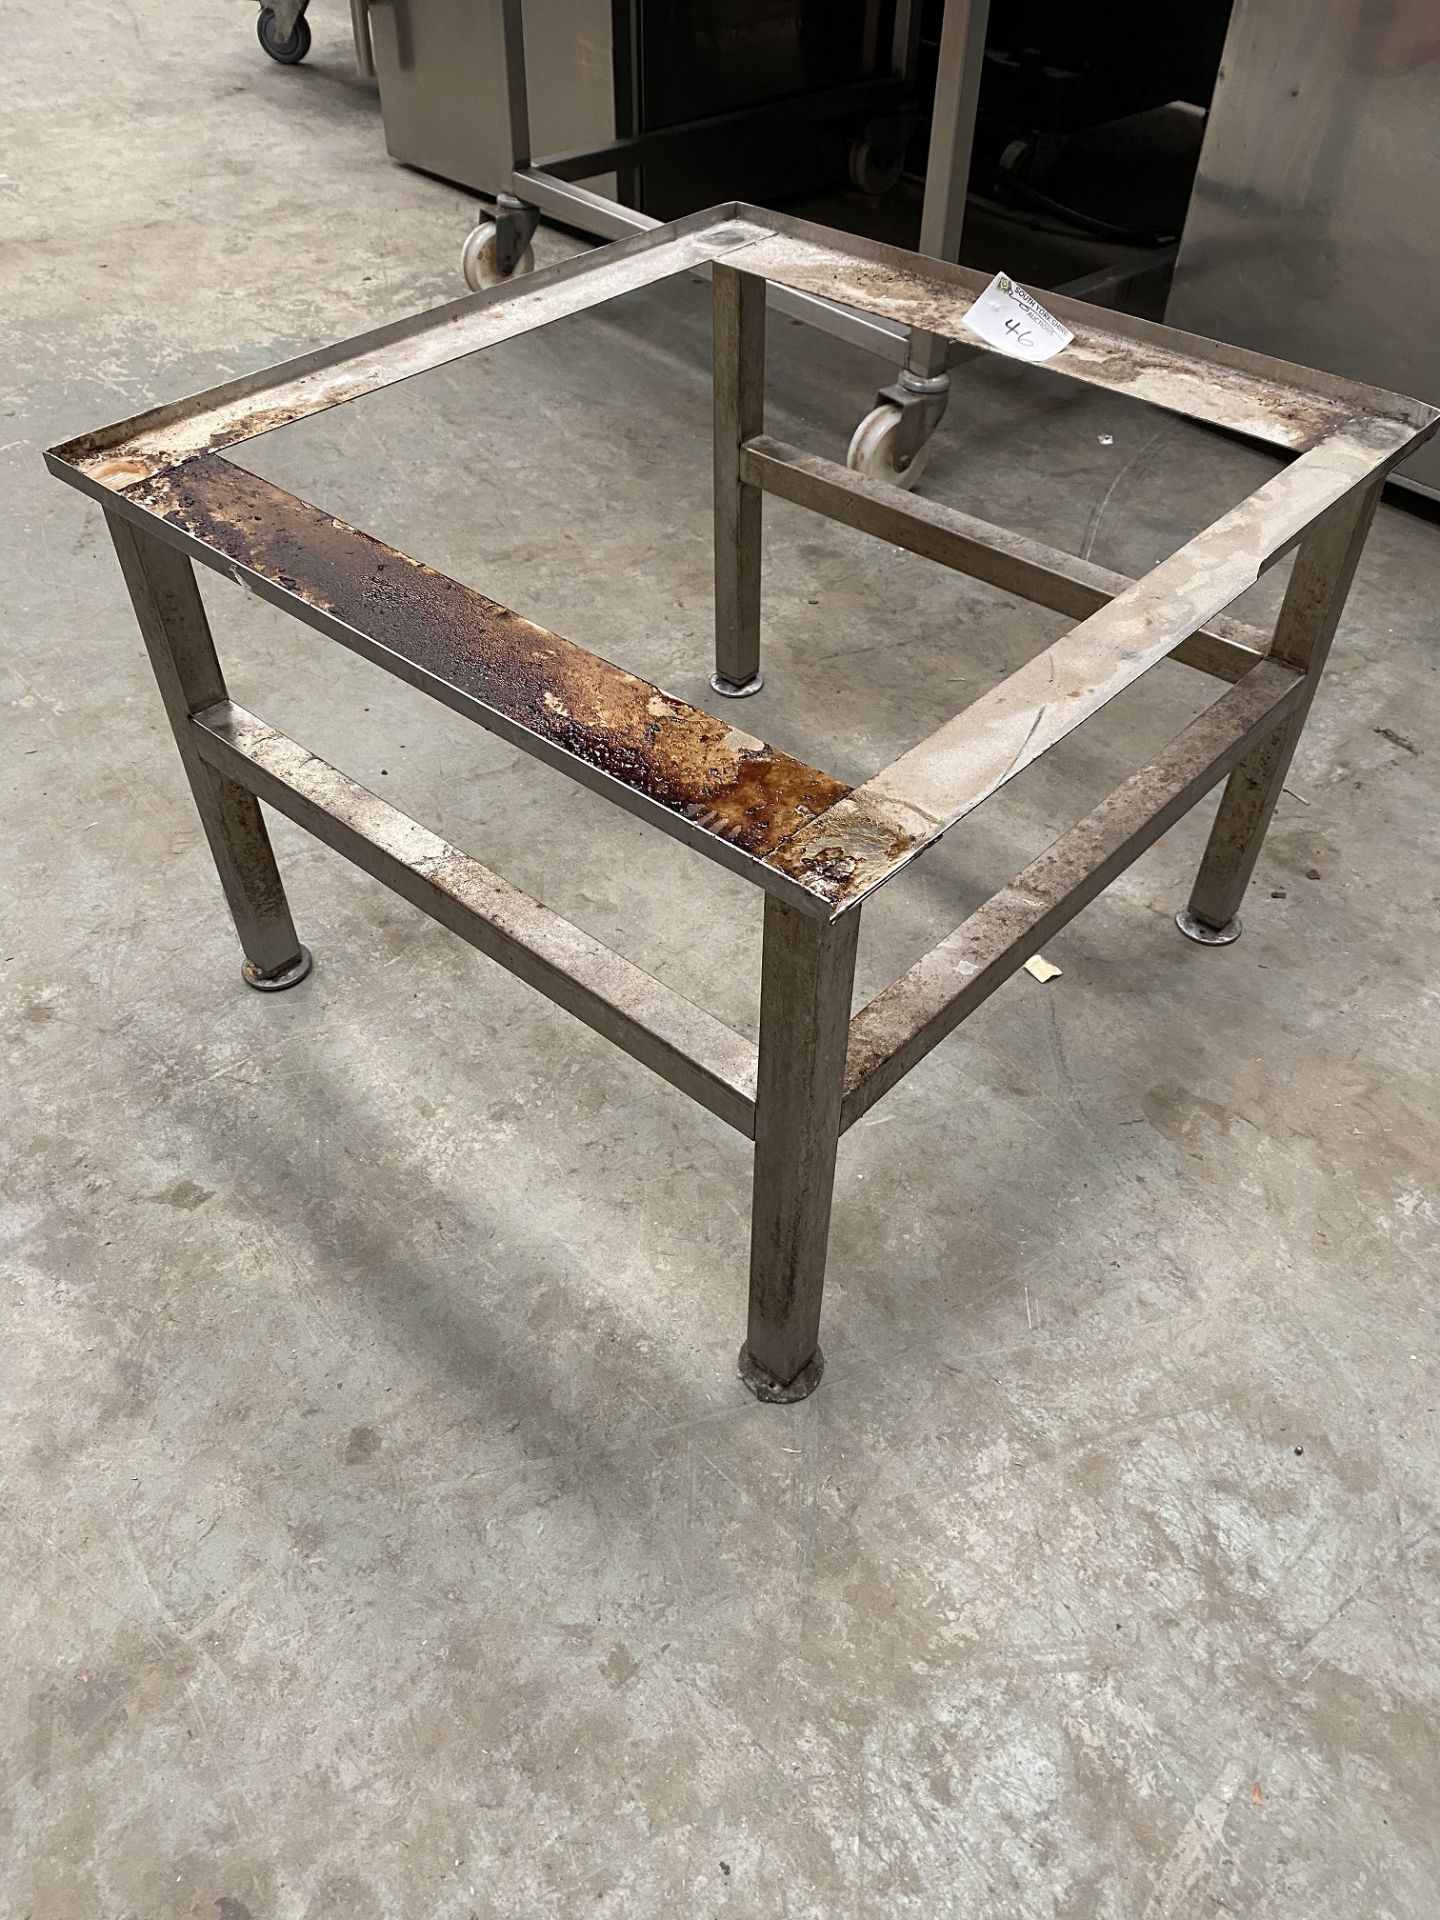 Stainless Steel Dishwasher Stand